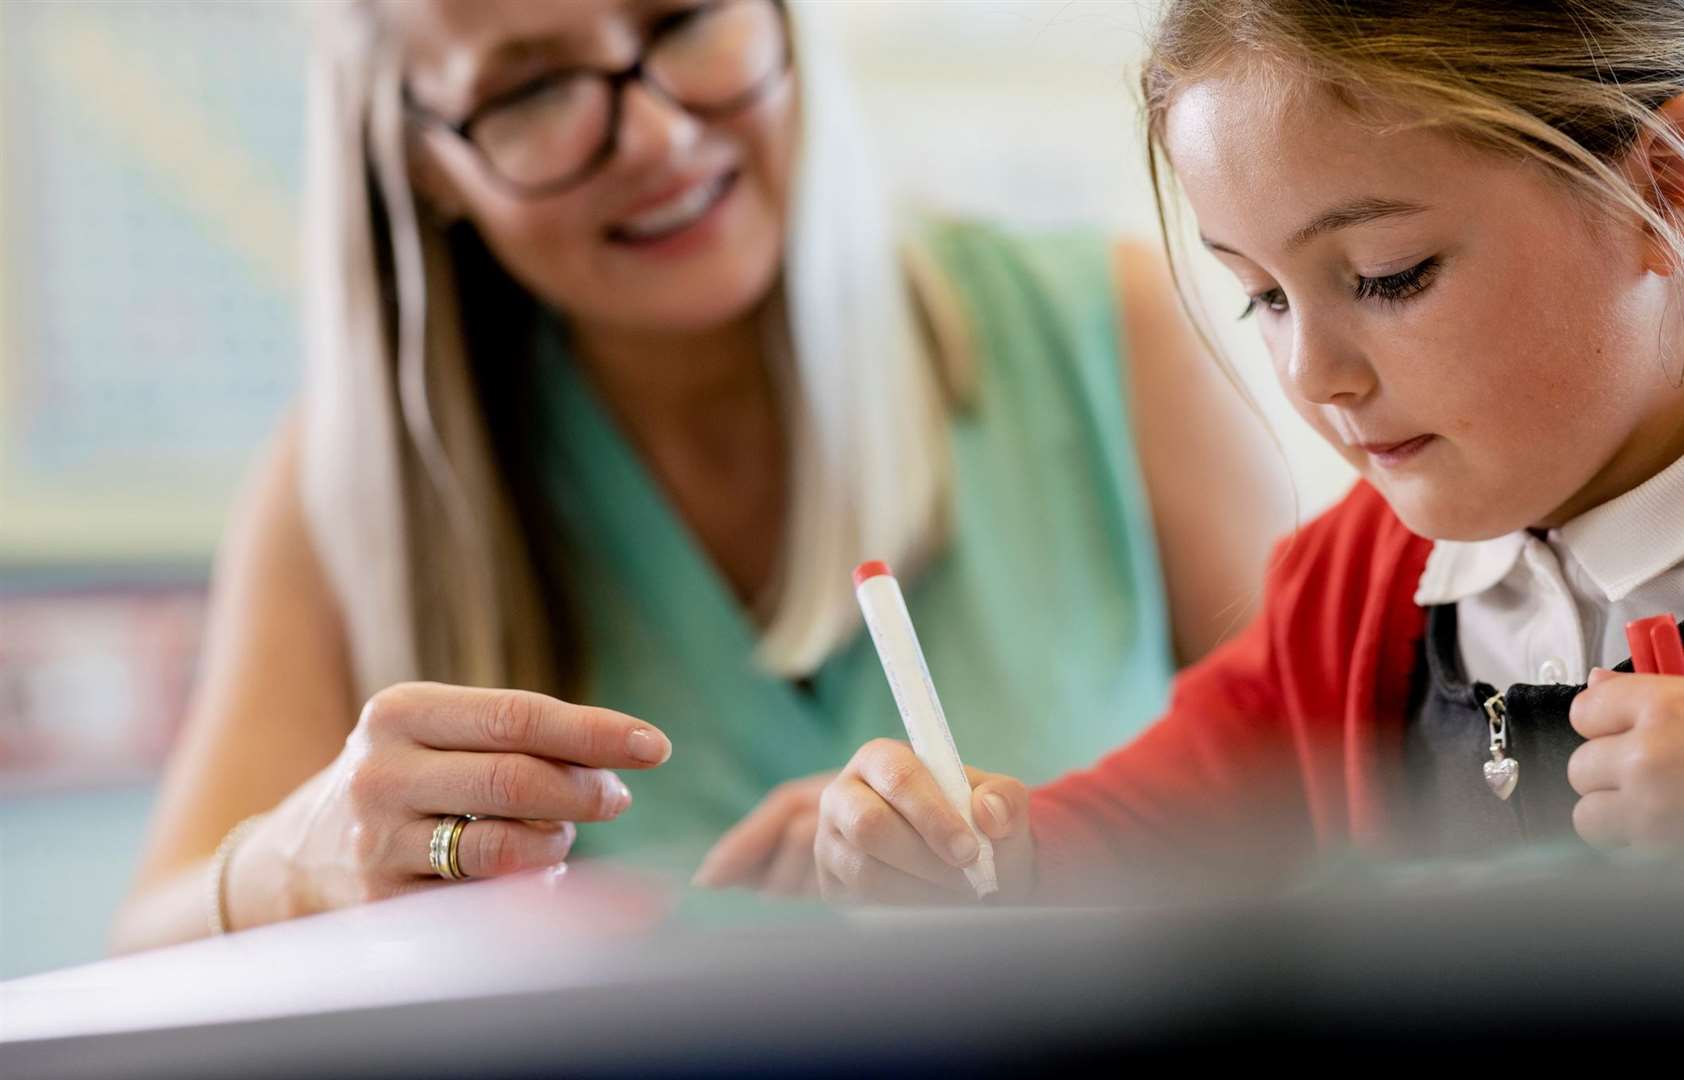 School appeals are heard by independent panels. Image: iStock.